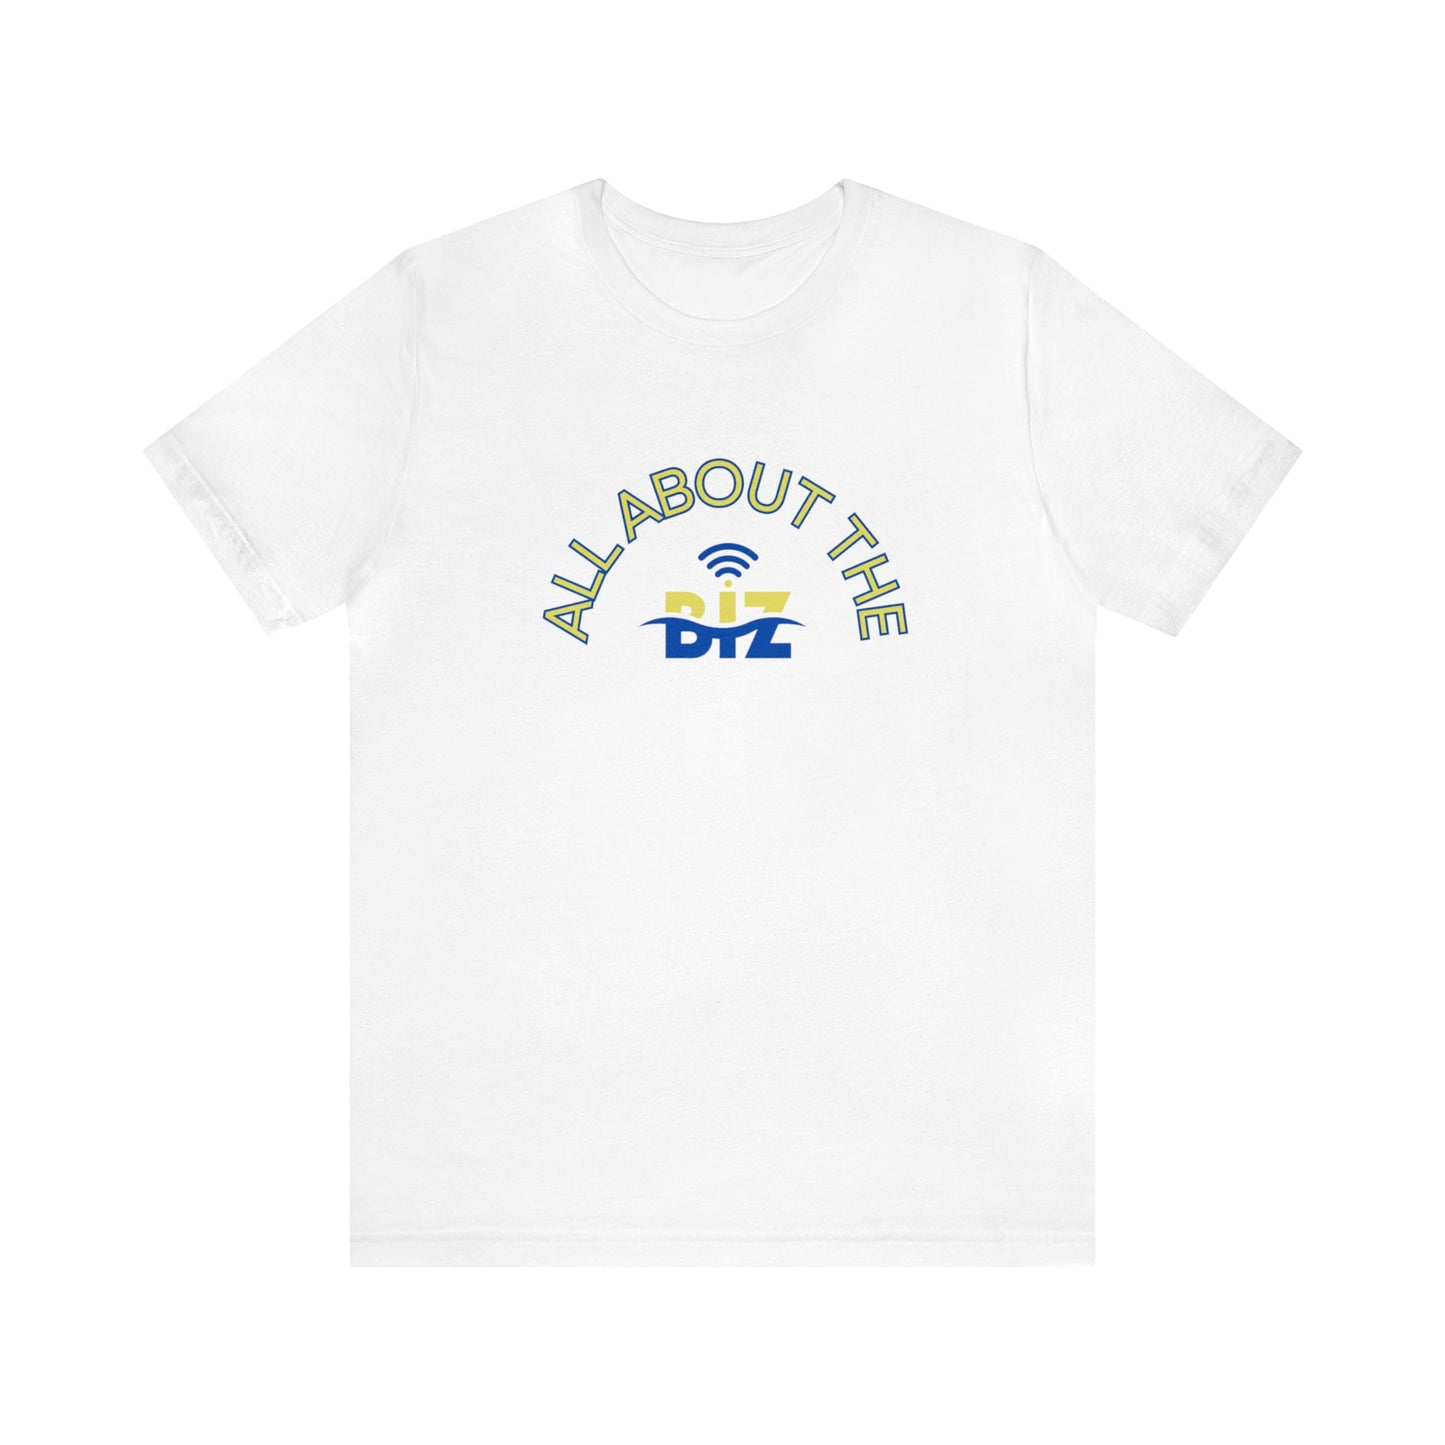 ALL ABOUT THE BIZ TEE